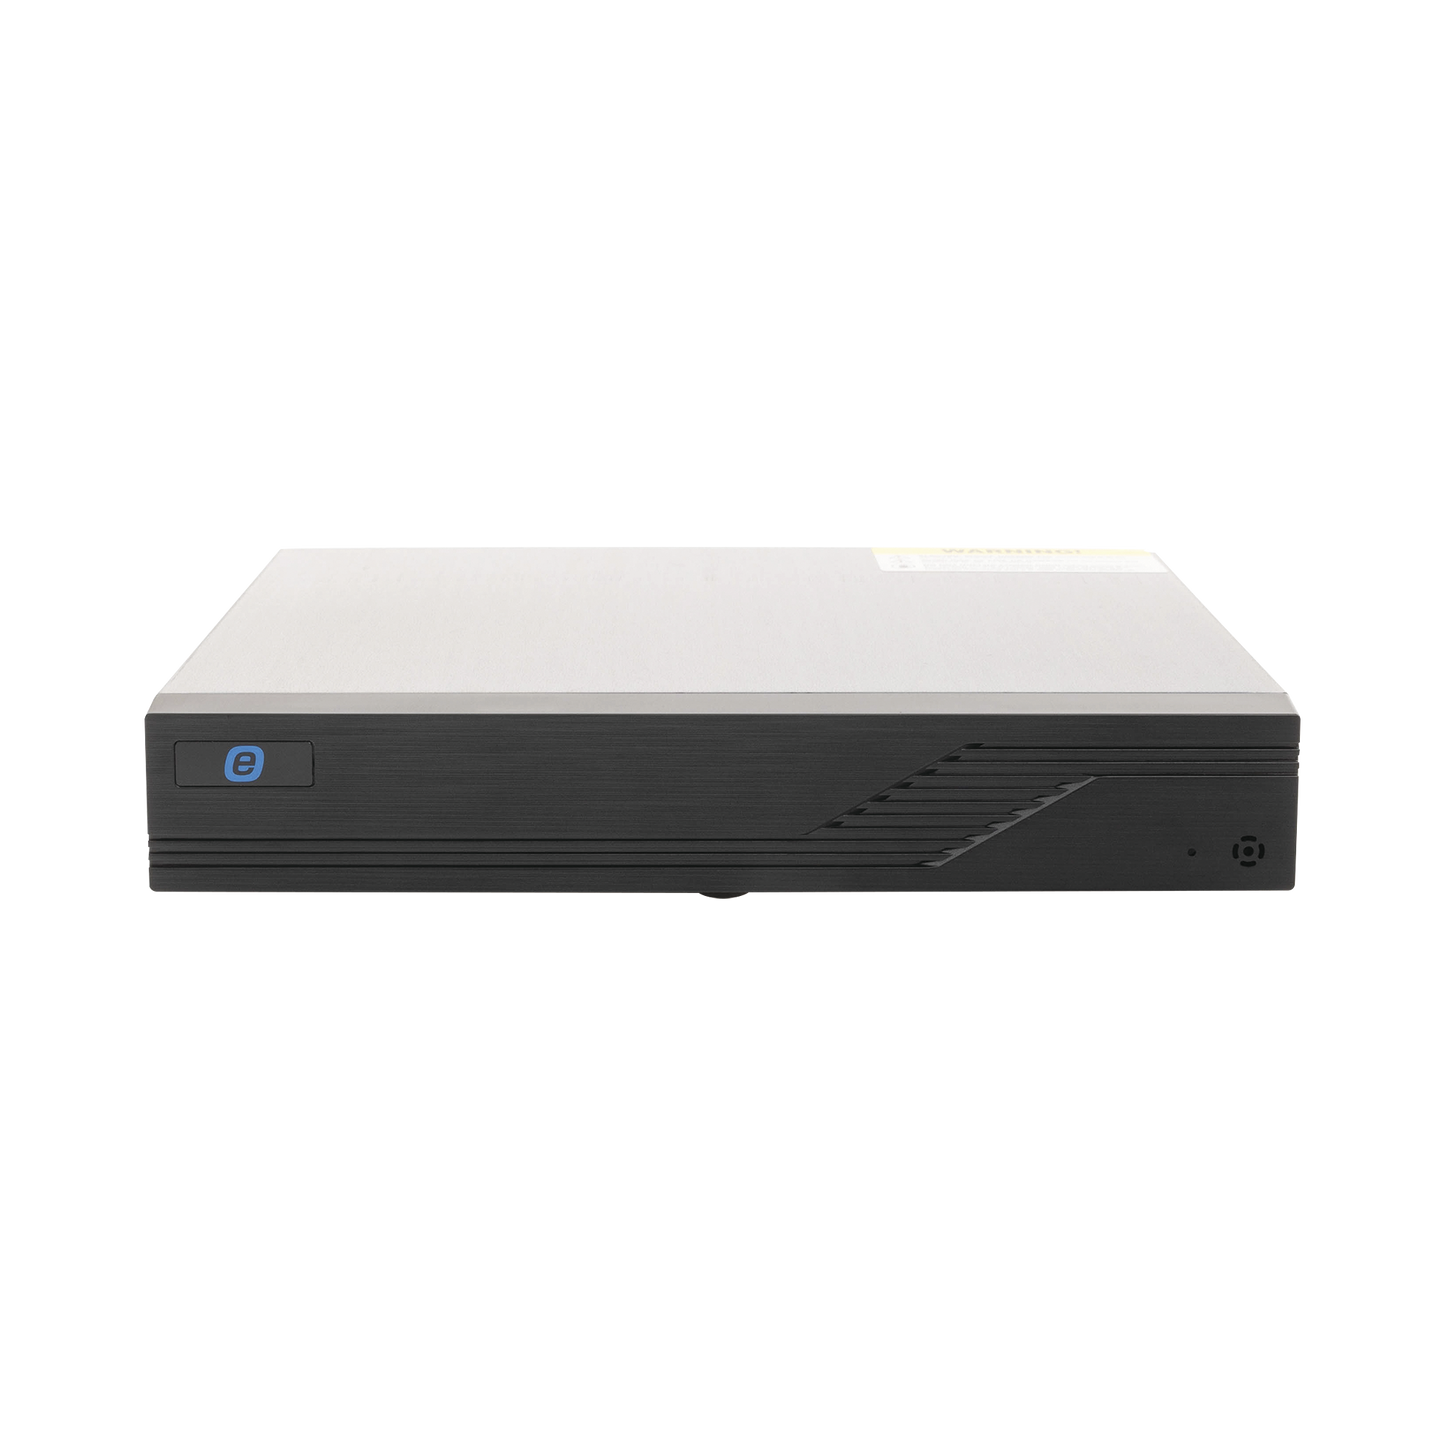 DVR 1080p / 4 Channels TURBOHD + 2 Channels IP / Support 1 Hard Disk / Video Output FULL HD / H.265 / AHD, TVI, CVBS, CVI / 1 Channel Audio / Cloud Video Recording / Supports audio by coaxitron